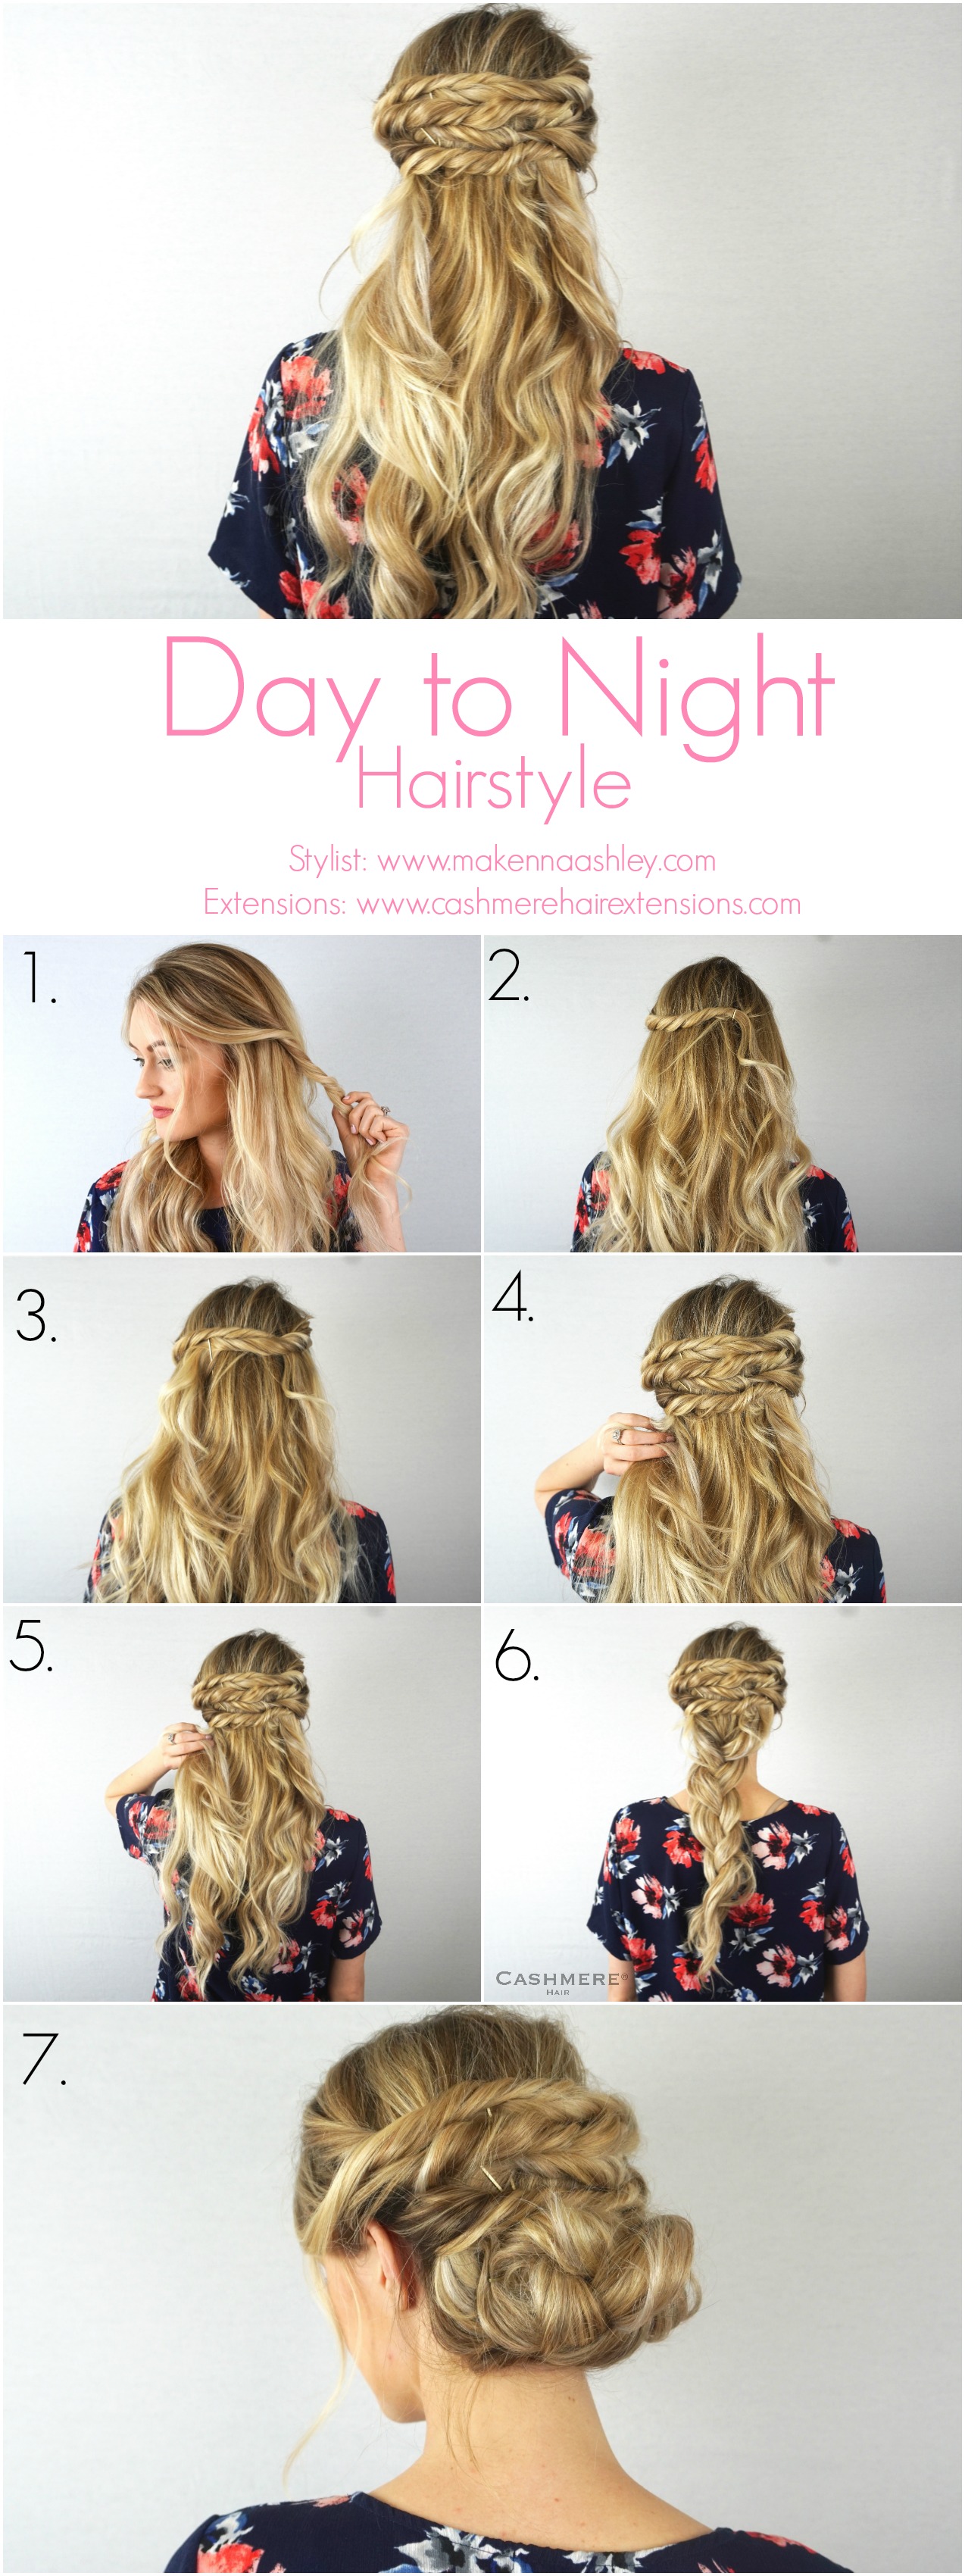 Day to Night Hairstyle